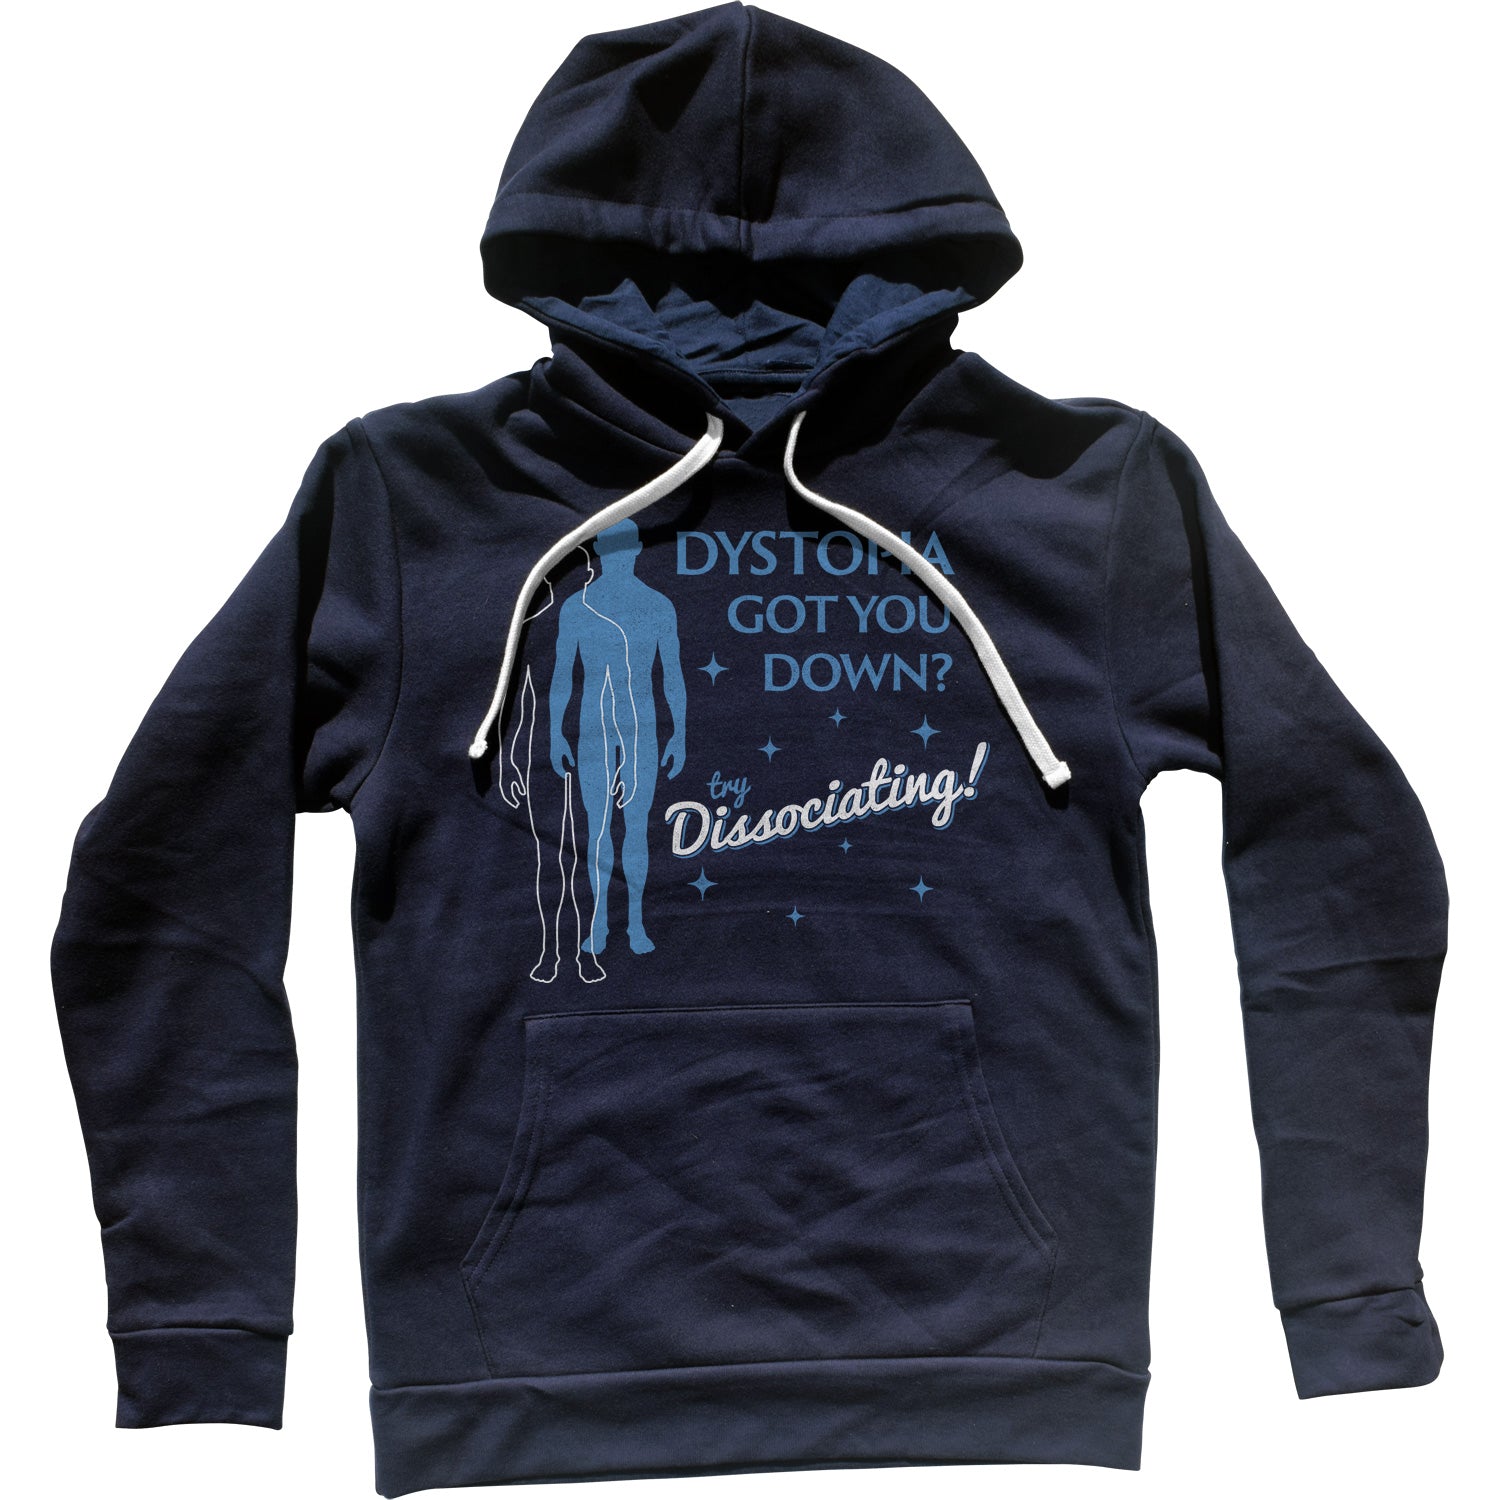 Dystopia Got You Down? Try Dissociating! Unisex Hoodie